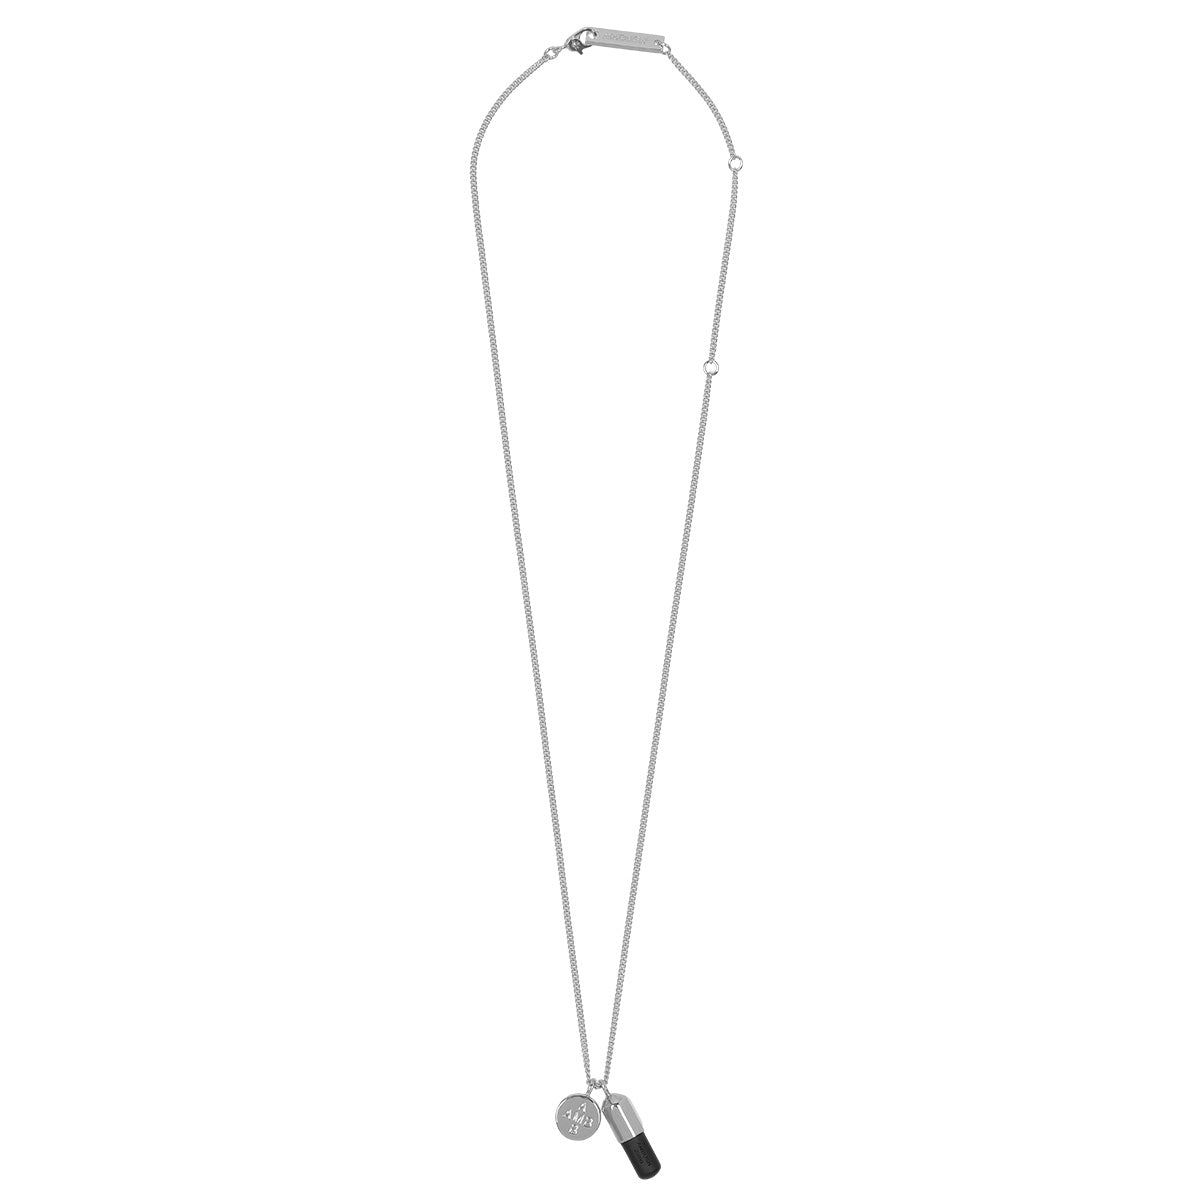 RICK OWENS リック・オウエンス   CHAIN NECKLACE ネックレス